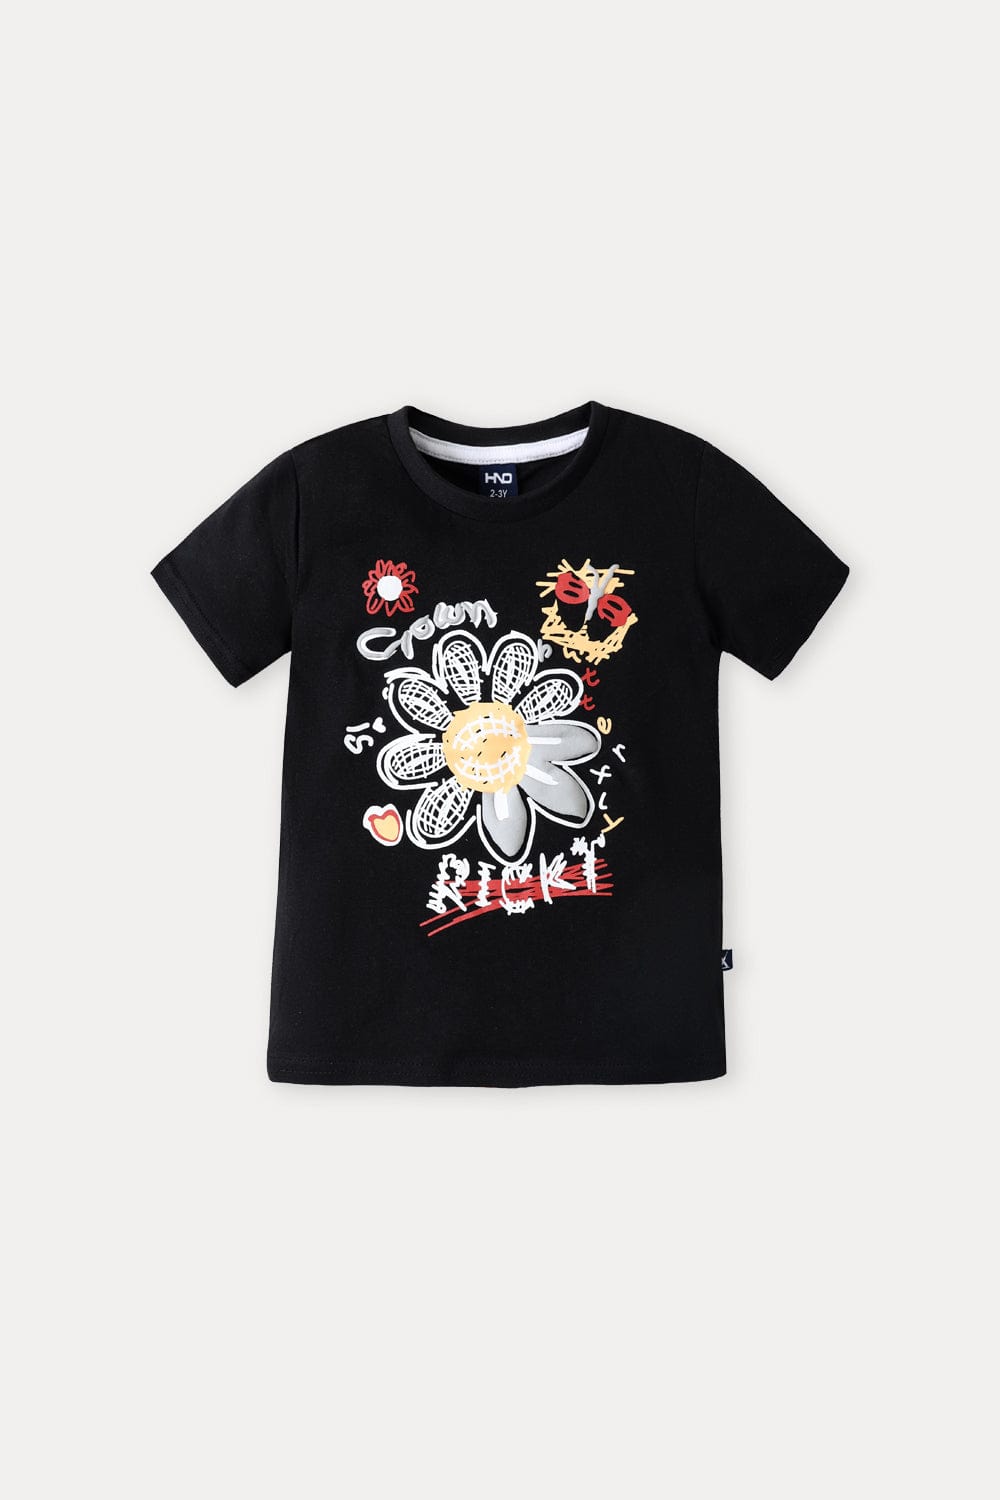 Hope Not Out by Shahid Afridi Girls Knit T-Shirt Doodle Puff Printed Half Sleeve T-Shirt for Girls